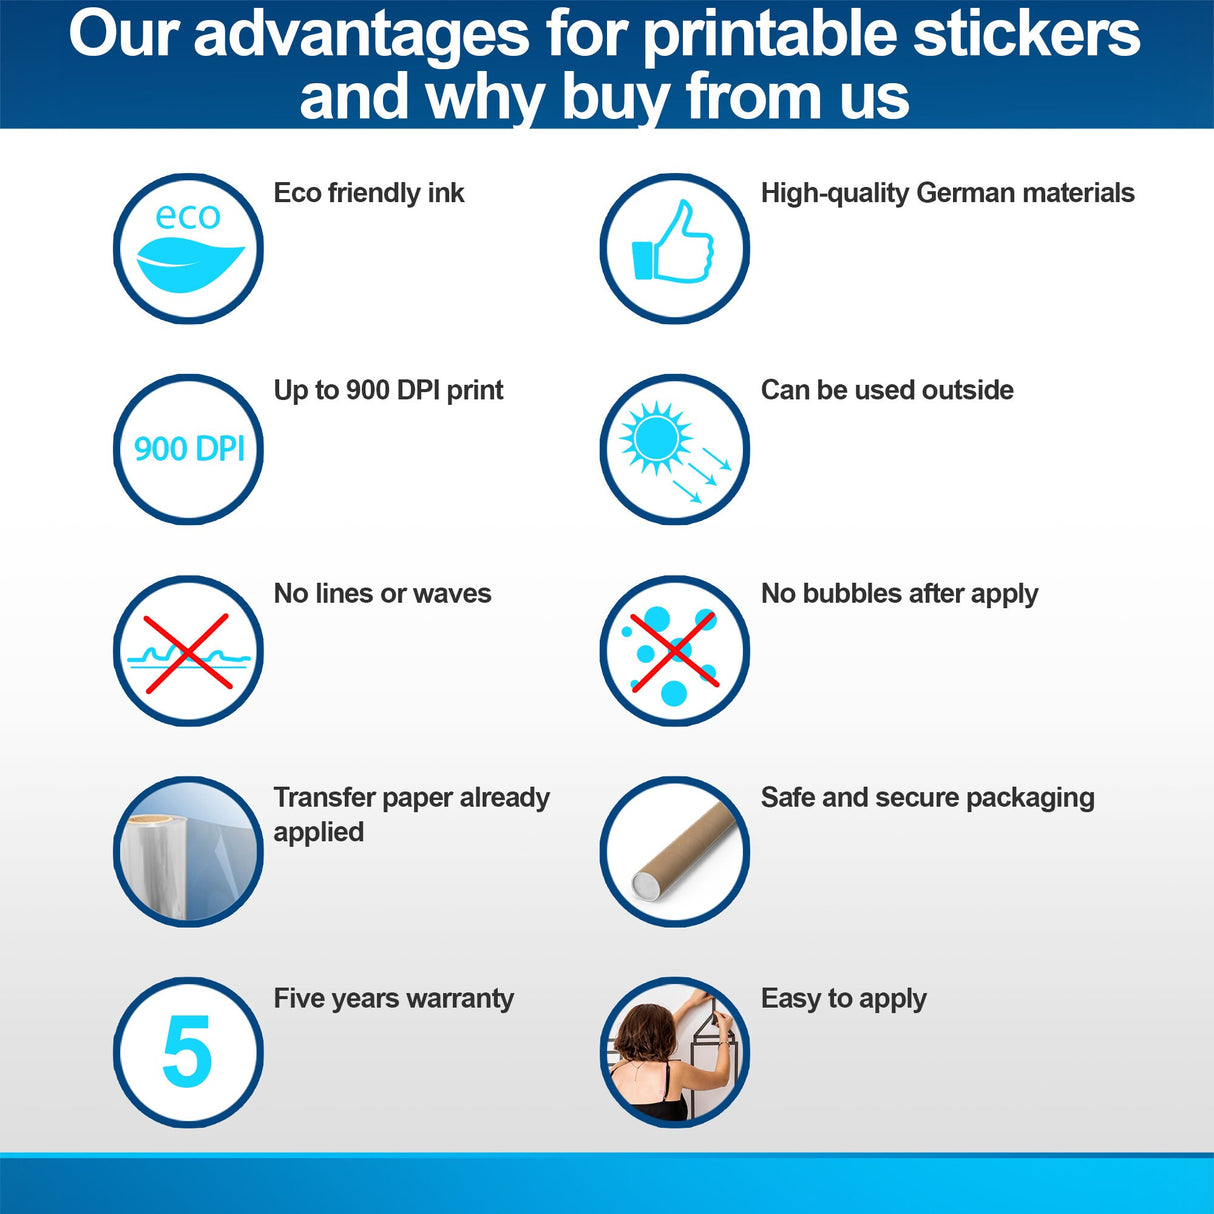 Custom Drawing Vectorize In Vinyl Sticker - Draw Portrait Design Art Made Photo In Illustration Decal